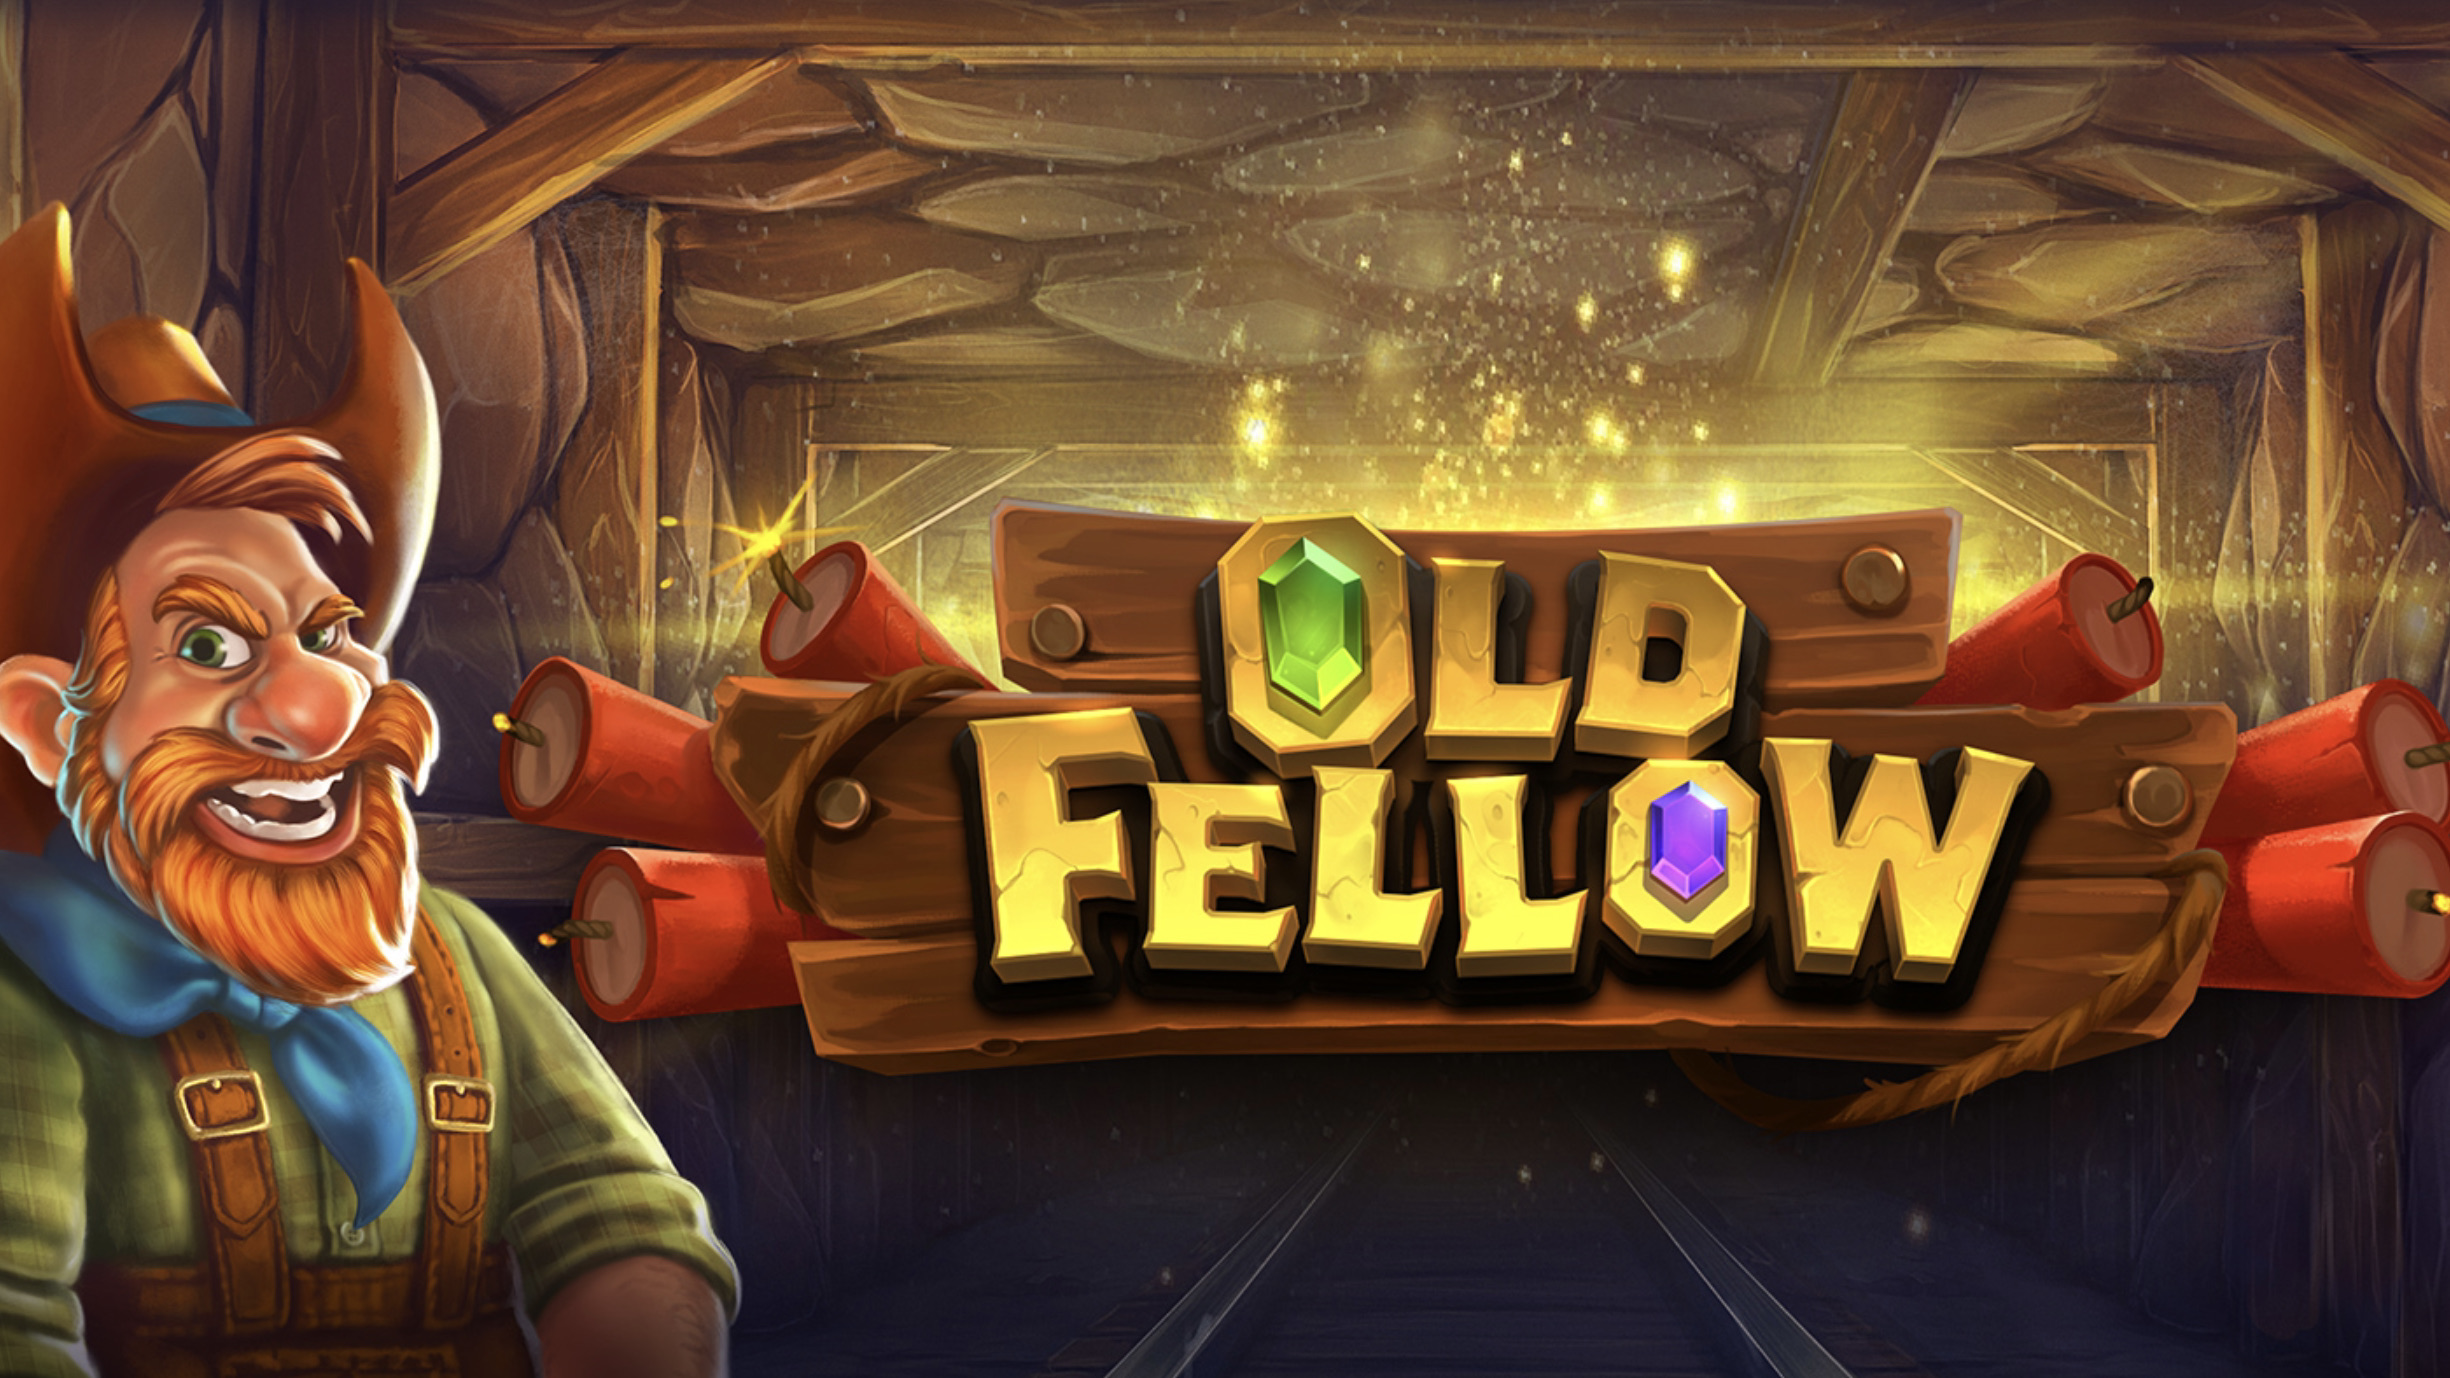 Old Fellow is a 5x4, 20-payline video slot which incorporates a free spins round and a maximum multiplier of up to x50,000 the bet.